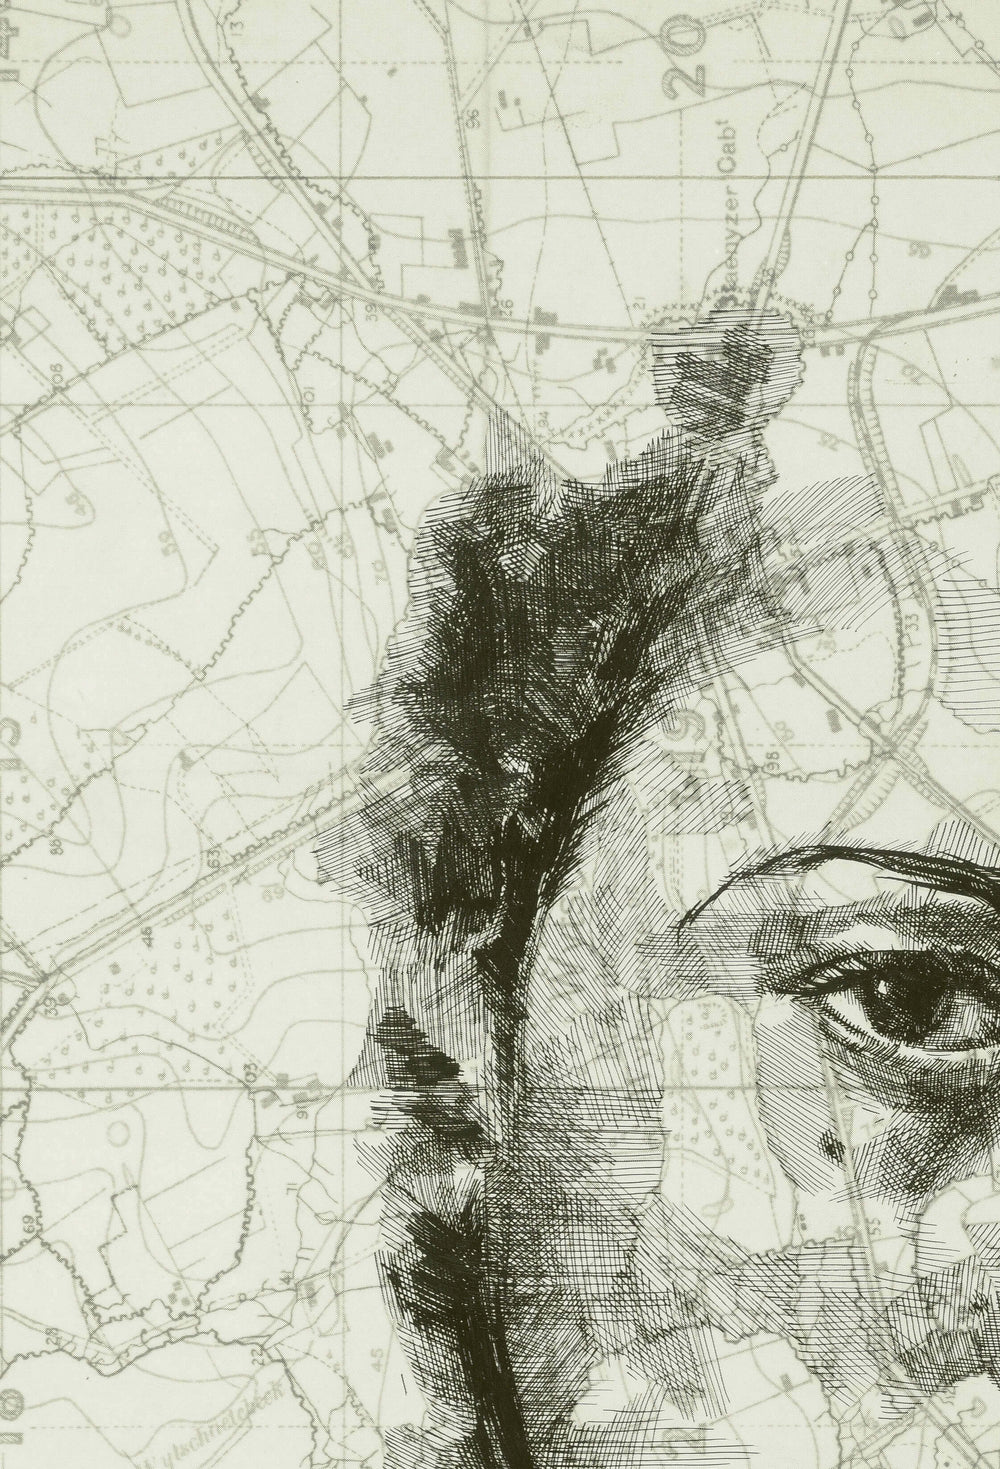 A drawing of a woman's face on a map by Ed Fairburn's "Western Front".